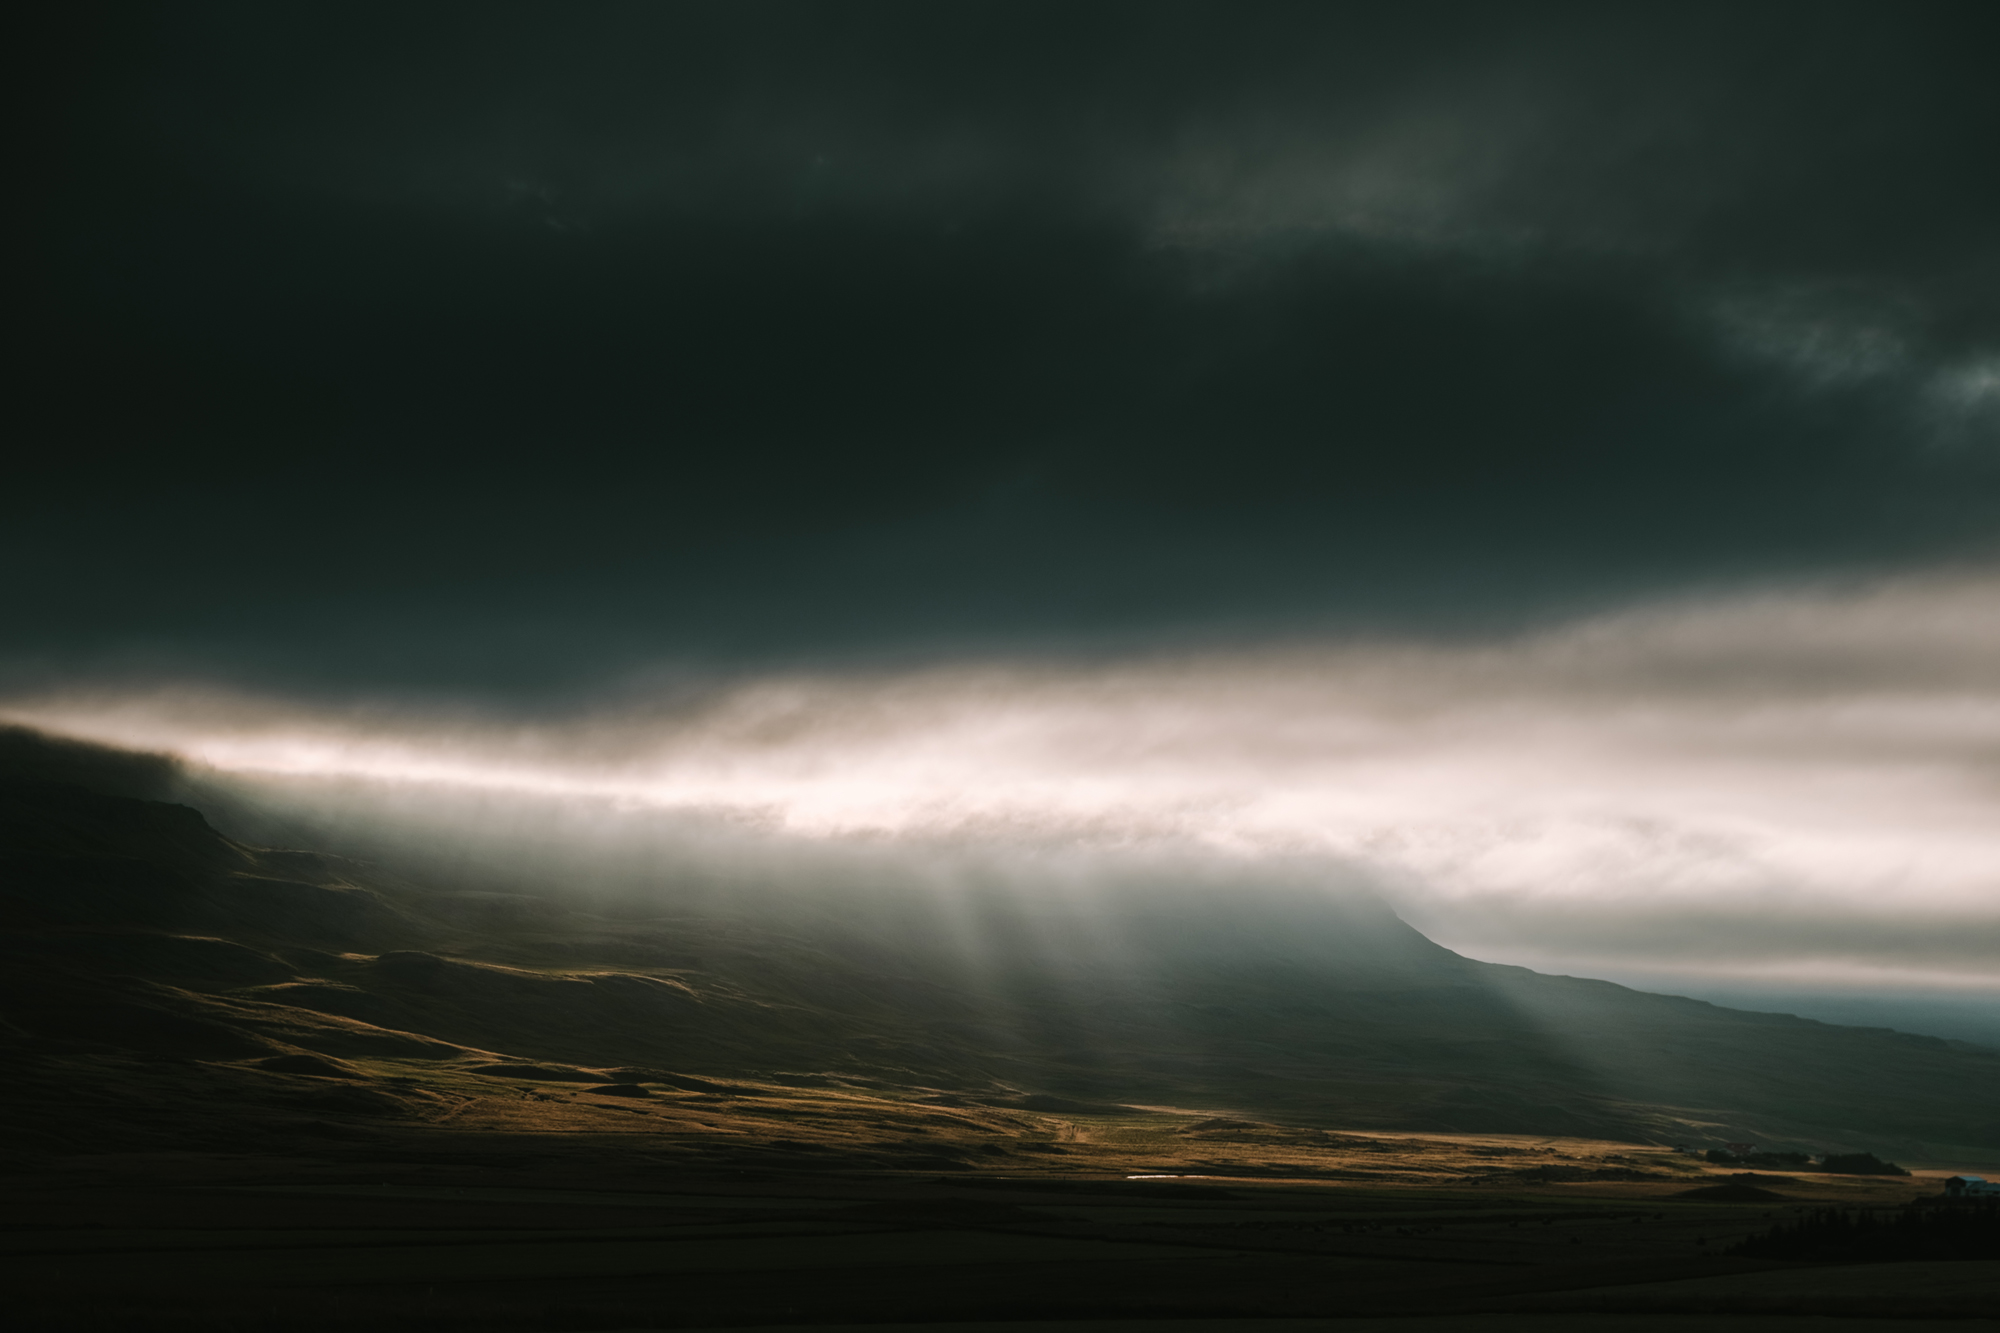 Writing with light in Iceland with the Fujifilm X-T3 and little gear